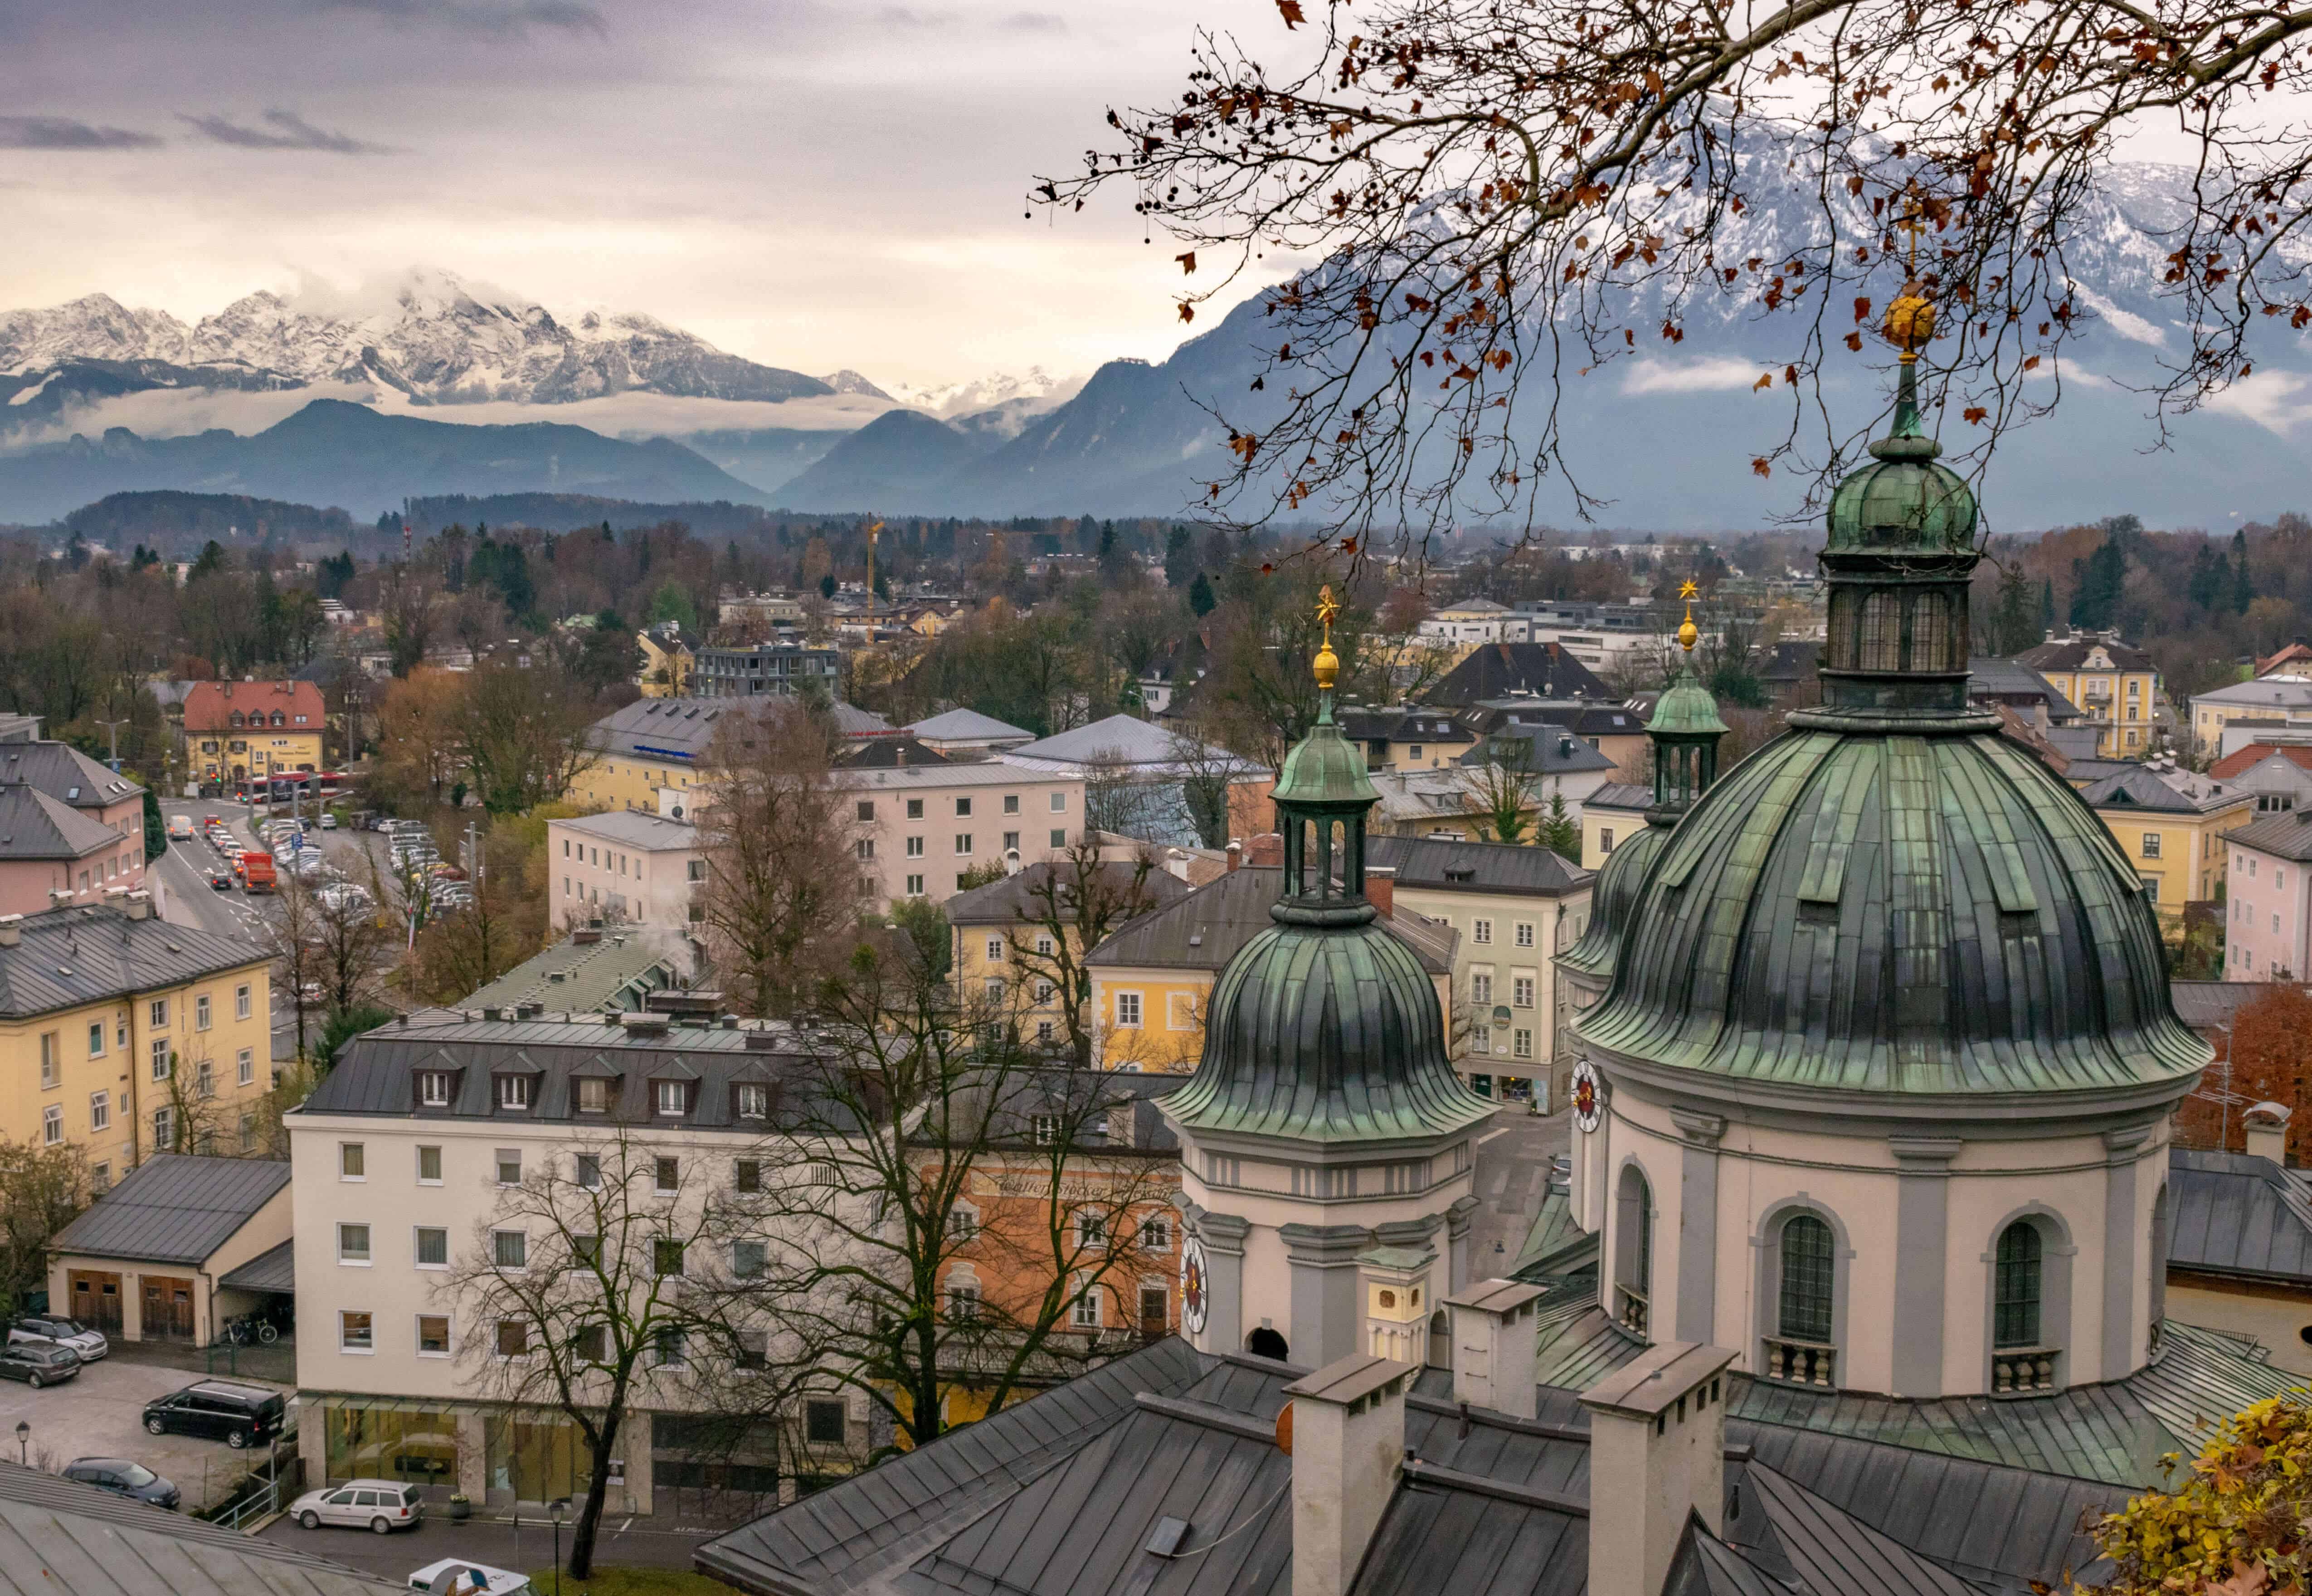 The view over Salzburg with snow-covered mountains in the background, a popular daytrip from Vienna